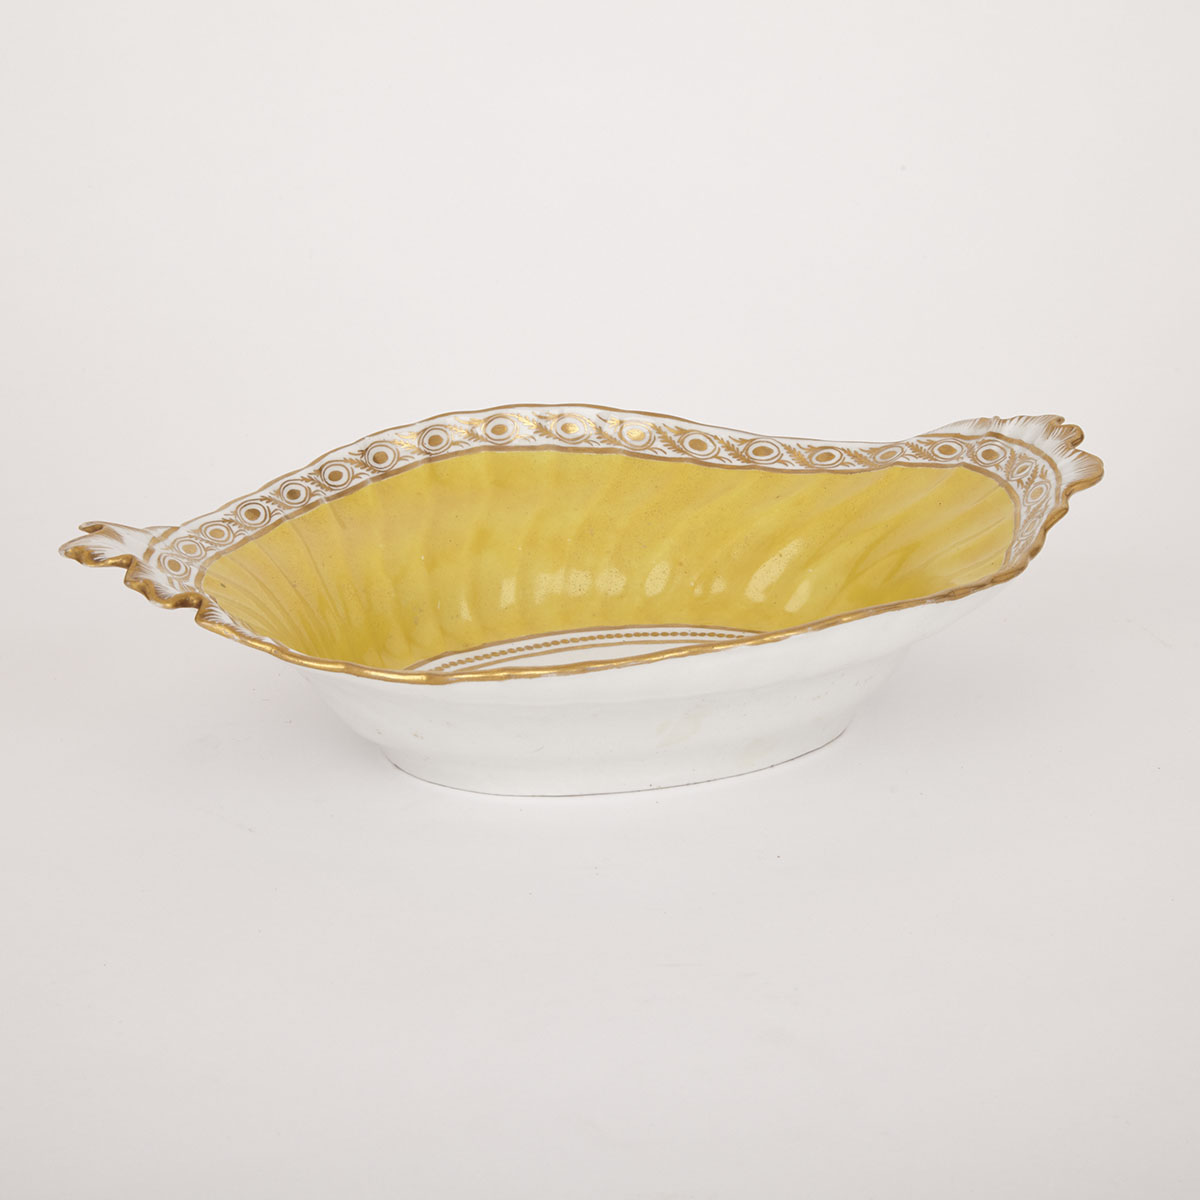 English Porcelain Yellow Ground Oval Fluted Dish, possibly Coalport, c.1800-10